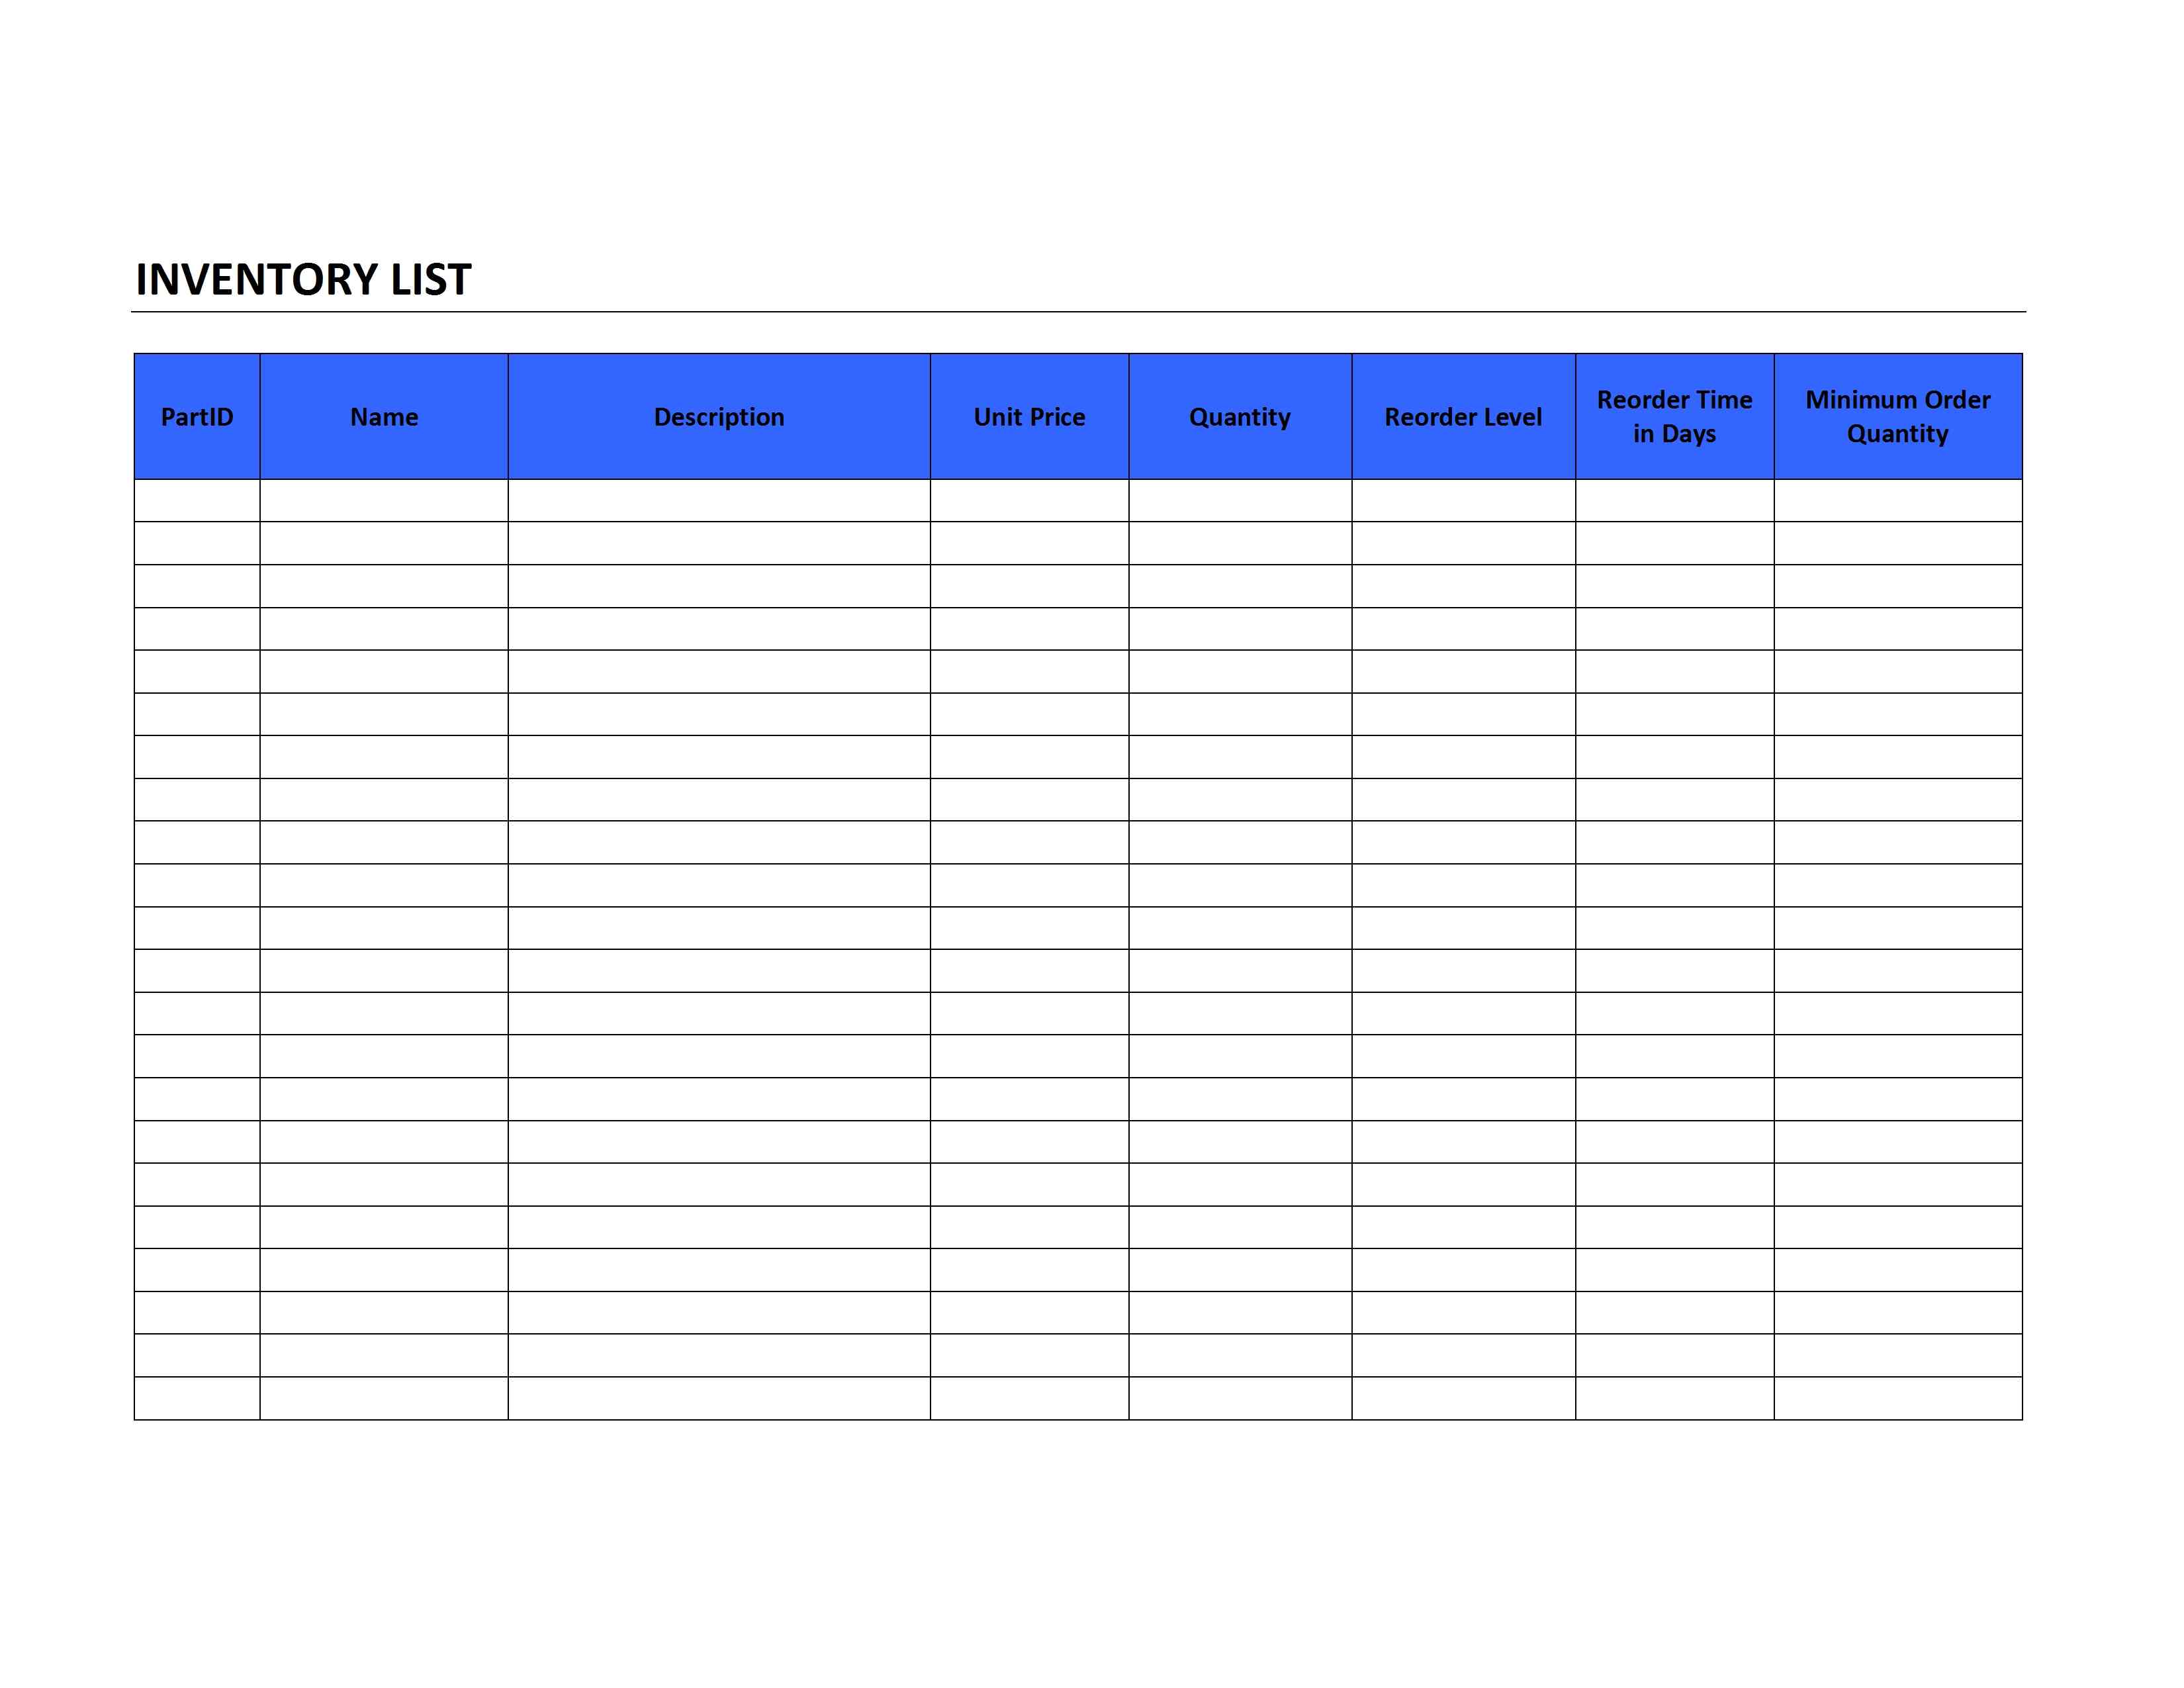 8-best-images-of-store-inventory-list-form-printable-blank-inventory